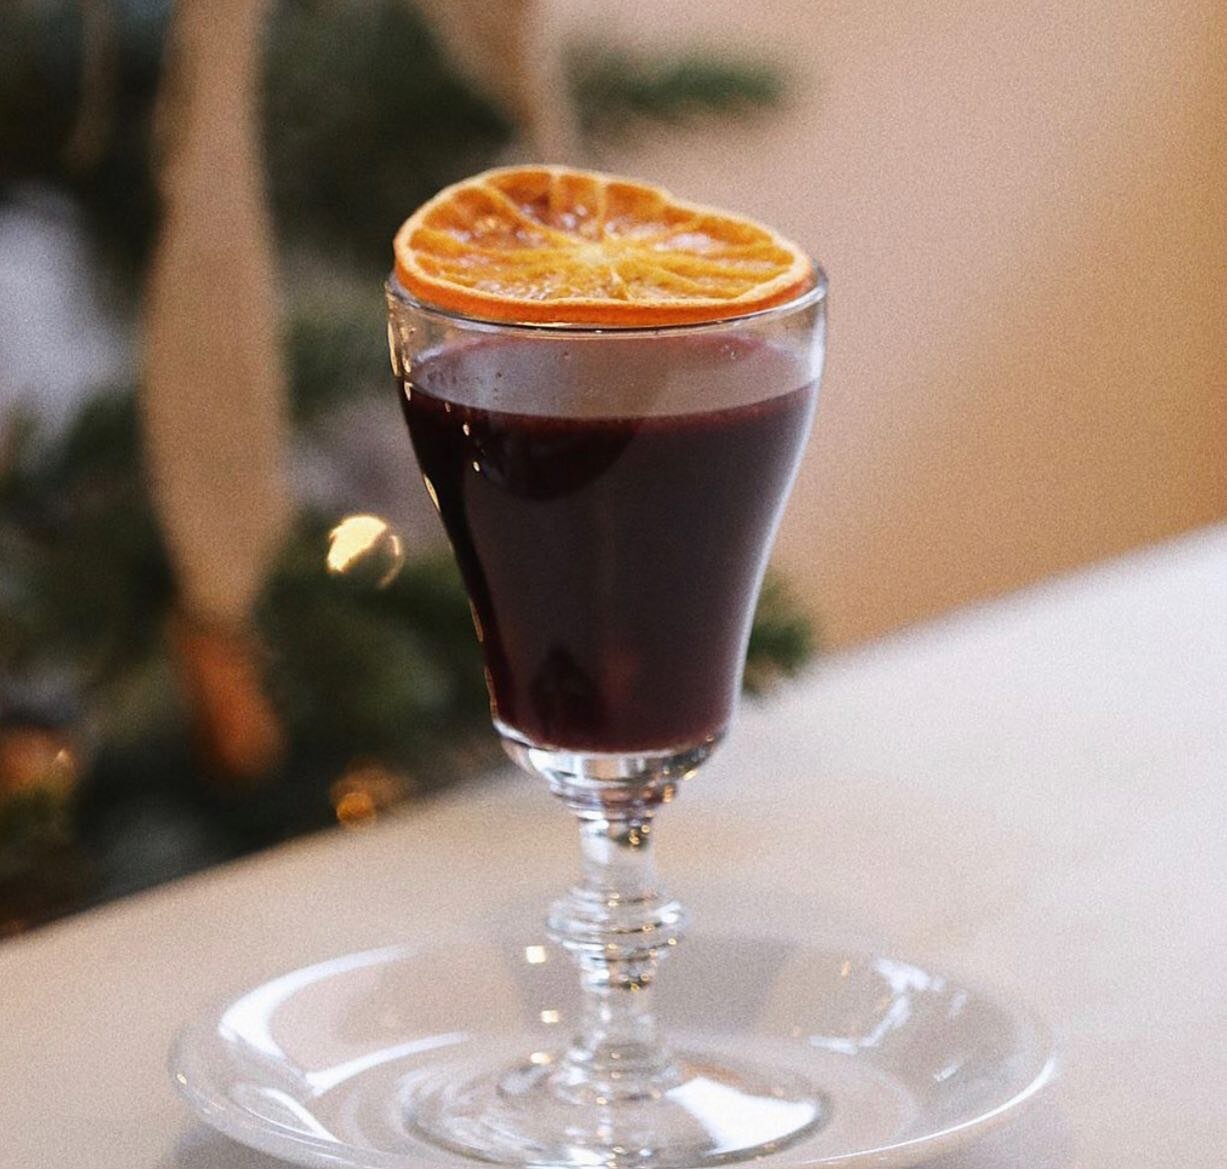 Tis the season! Our mulled wine is back 🎄 Cinnamon, nutmeg, cloves, star anise and a dash of spiced rum, &pound;6. Delicious! #TheAddress